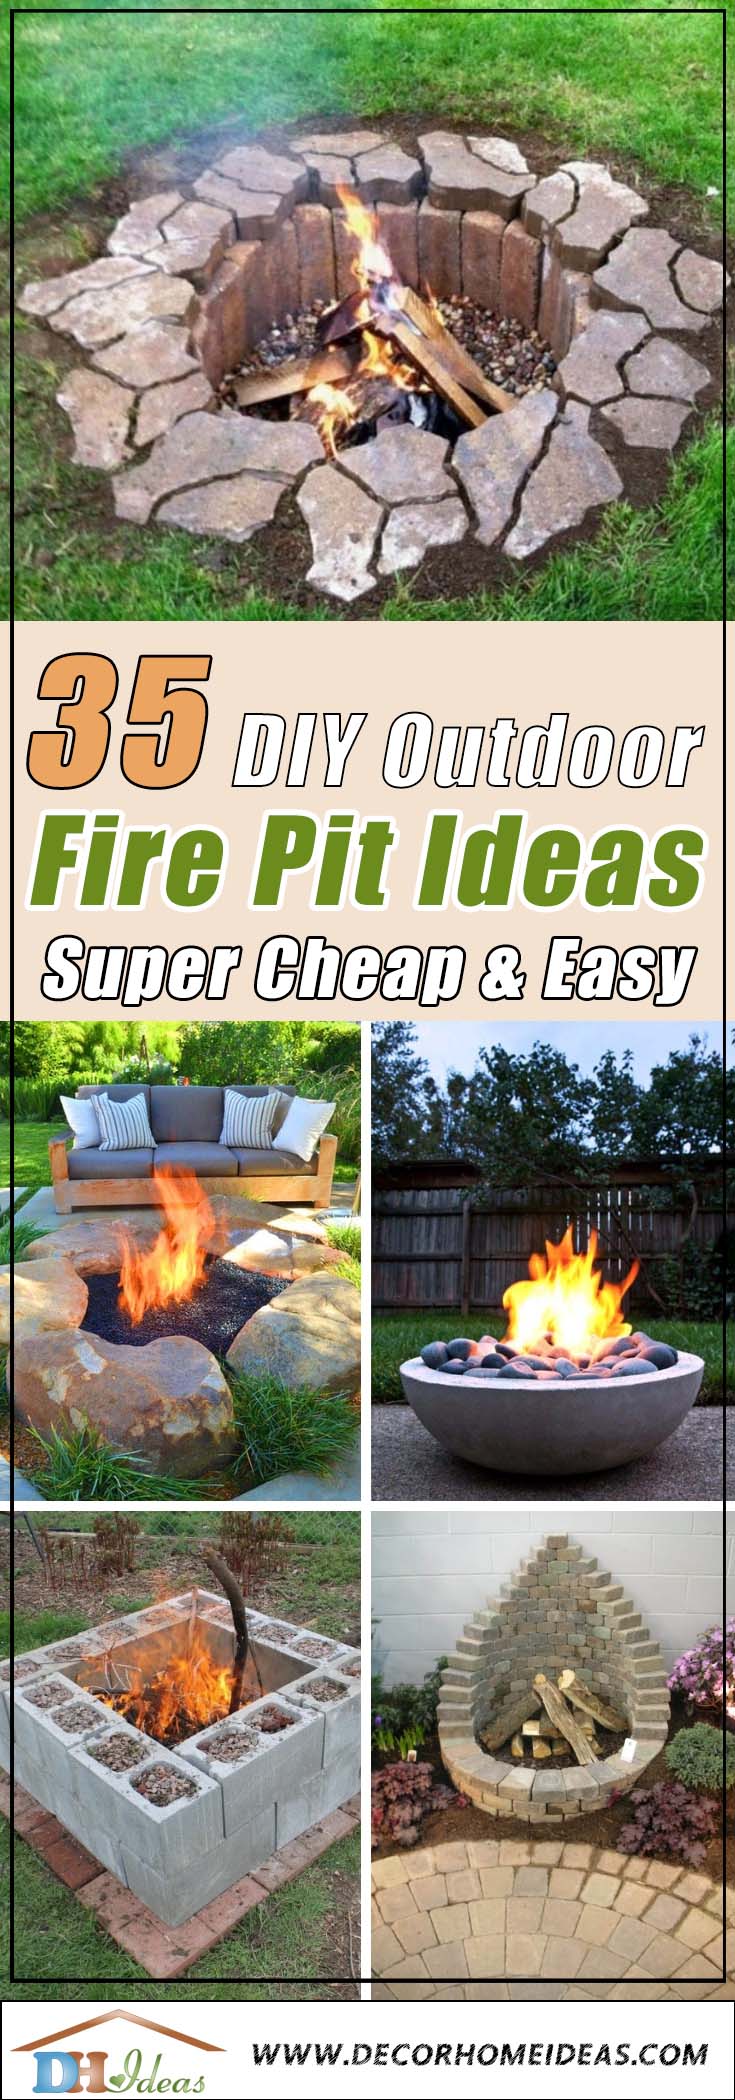 35 Easy To Do Fire Pit Ideas And, Diy Portable Fire Pit Homemade